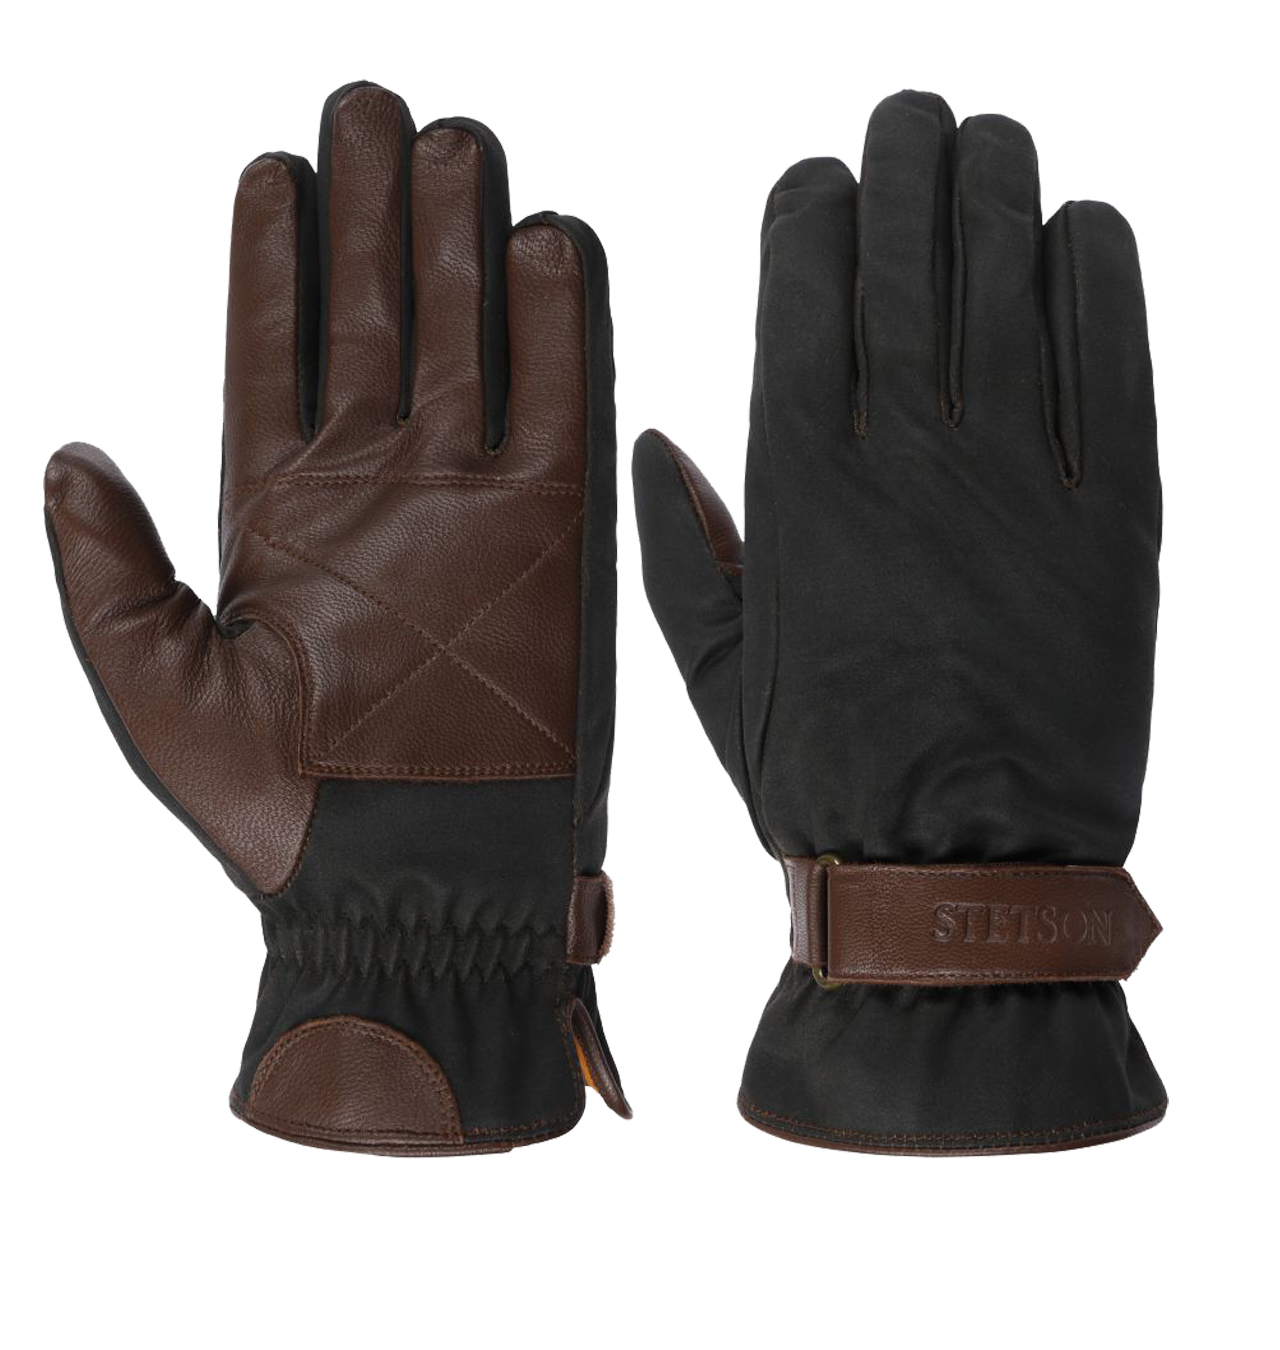 Stetson - Two-tone Goat Nappa Leather Gloves - Dark Brown